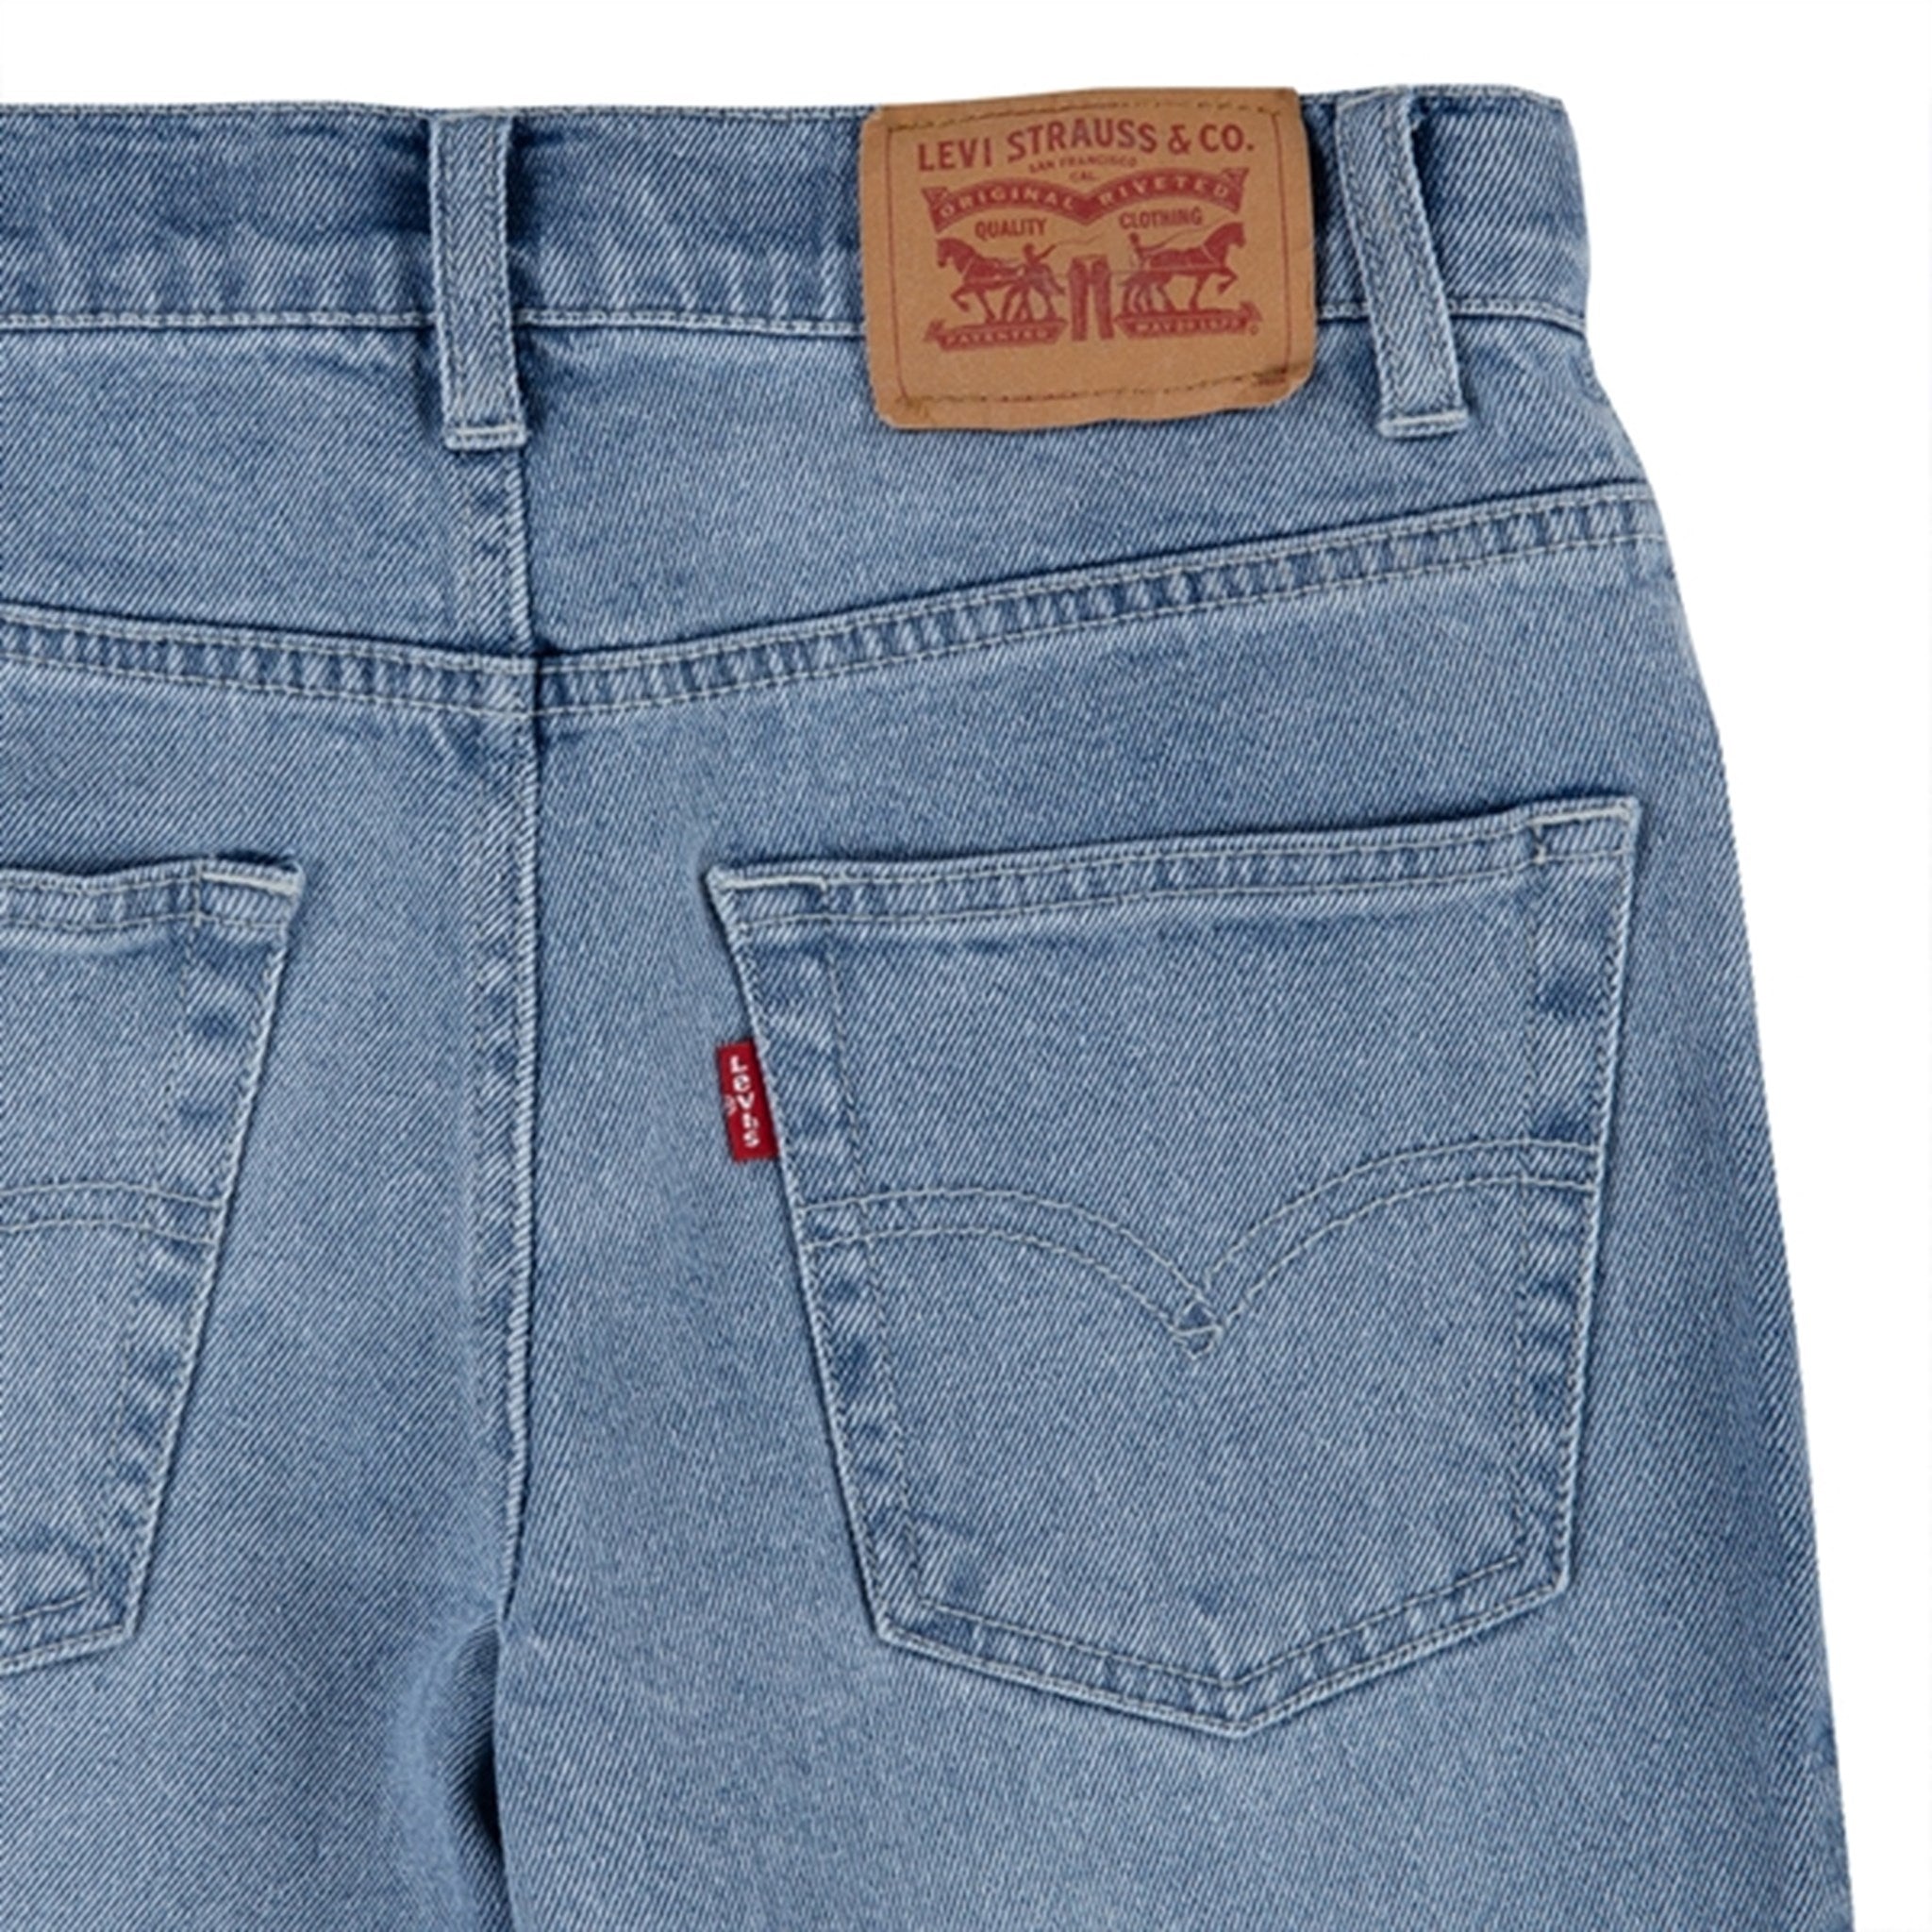 Levi's 551Z Authentic Straight Stretch Jeans Make Me 5